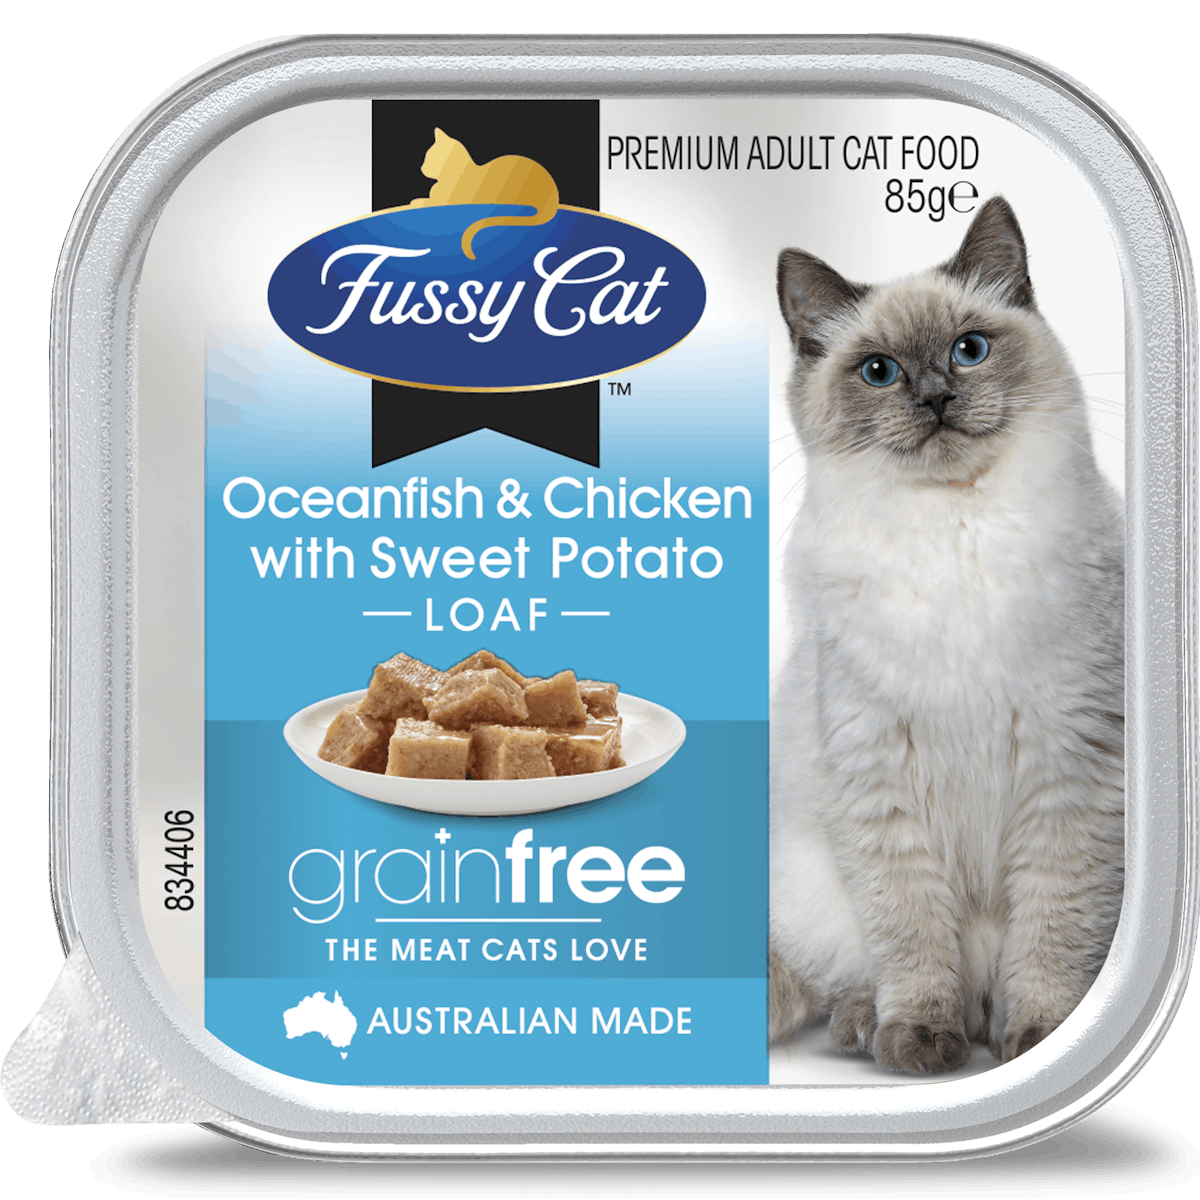 Fussy Cat | Oceanfish and Chicken with Sweet Potato 85g | Wet Cat Food | Left of pack